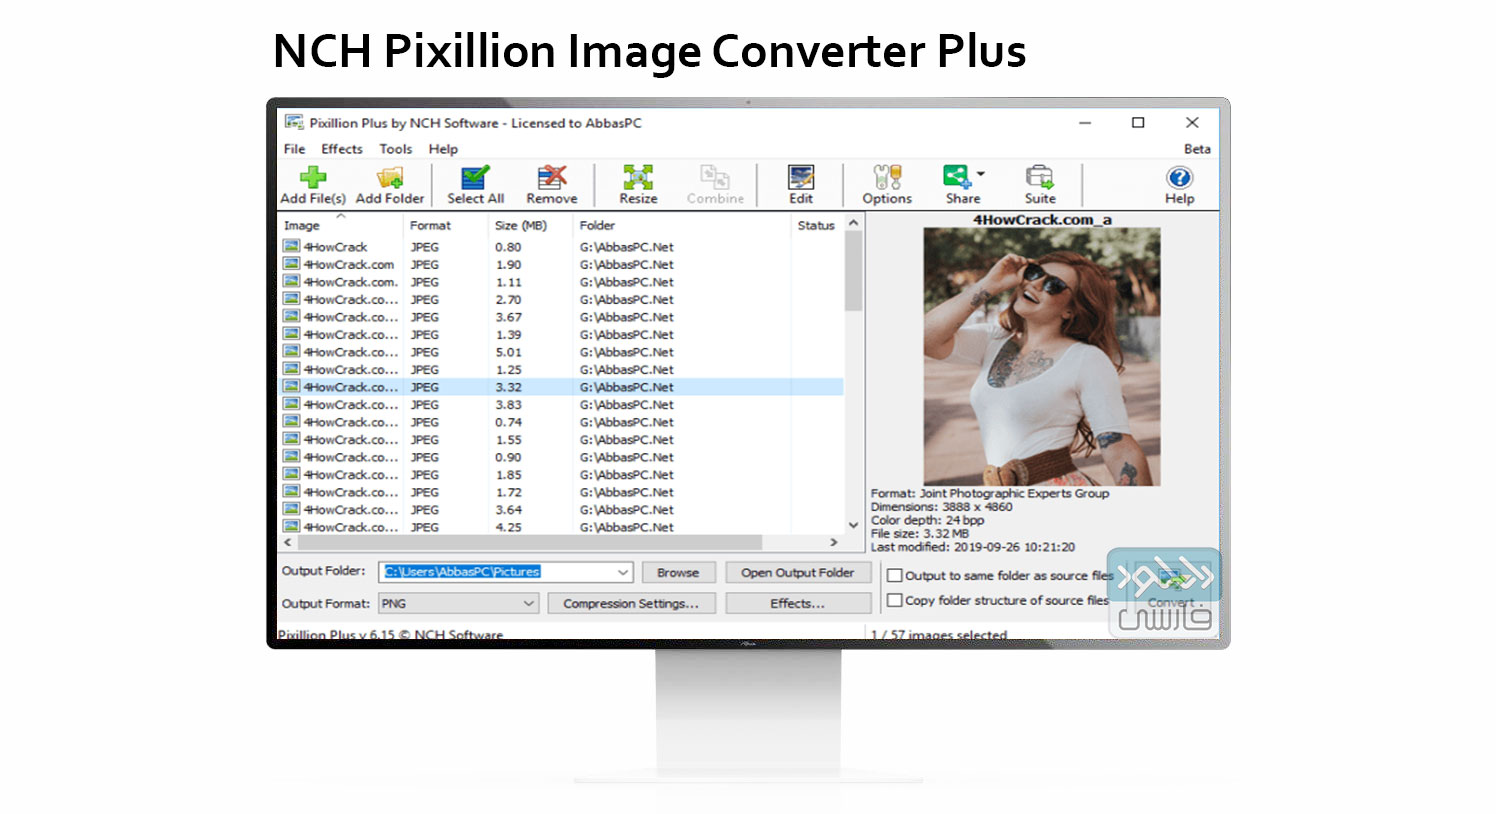 download the new version for apple NCH Pixillion Image Converter Plus 11.45